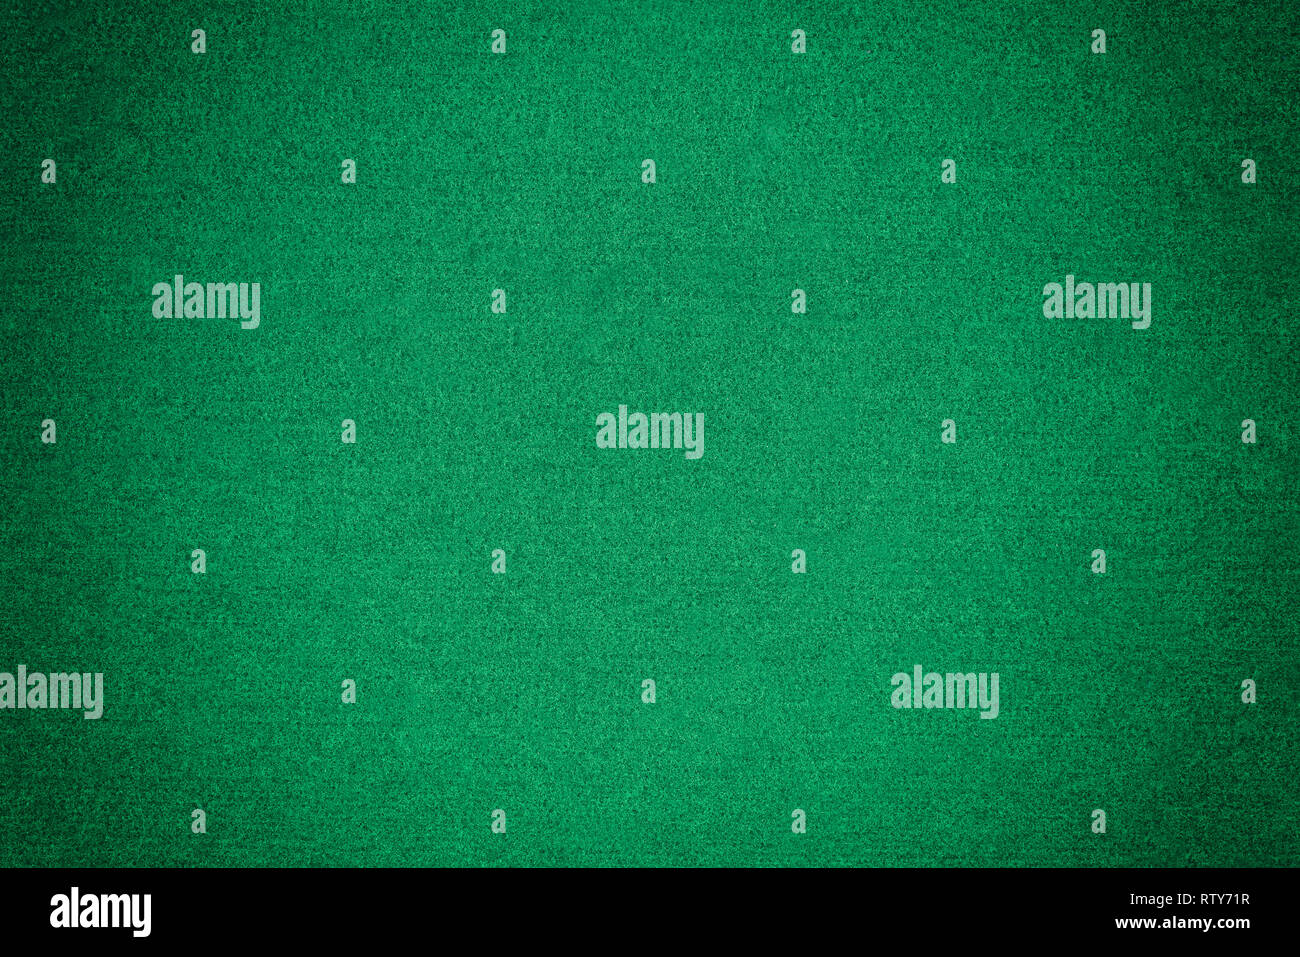 Green felt texture for poker and casino., Stock image